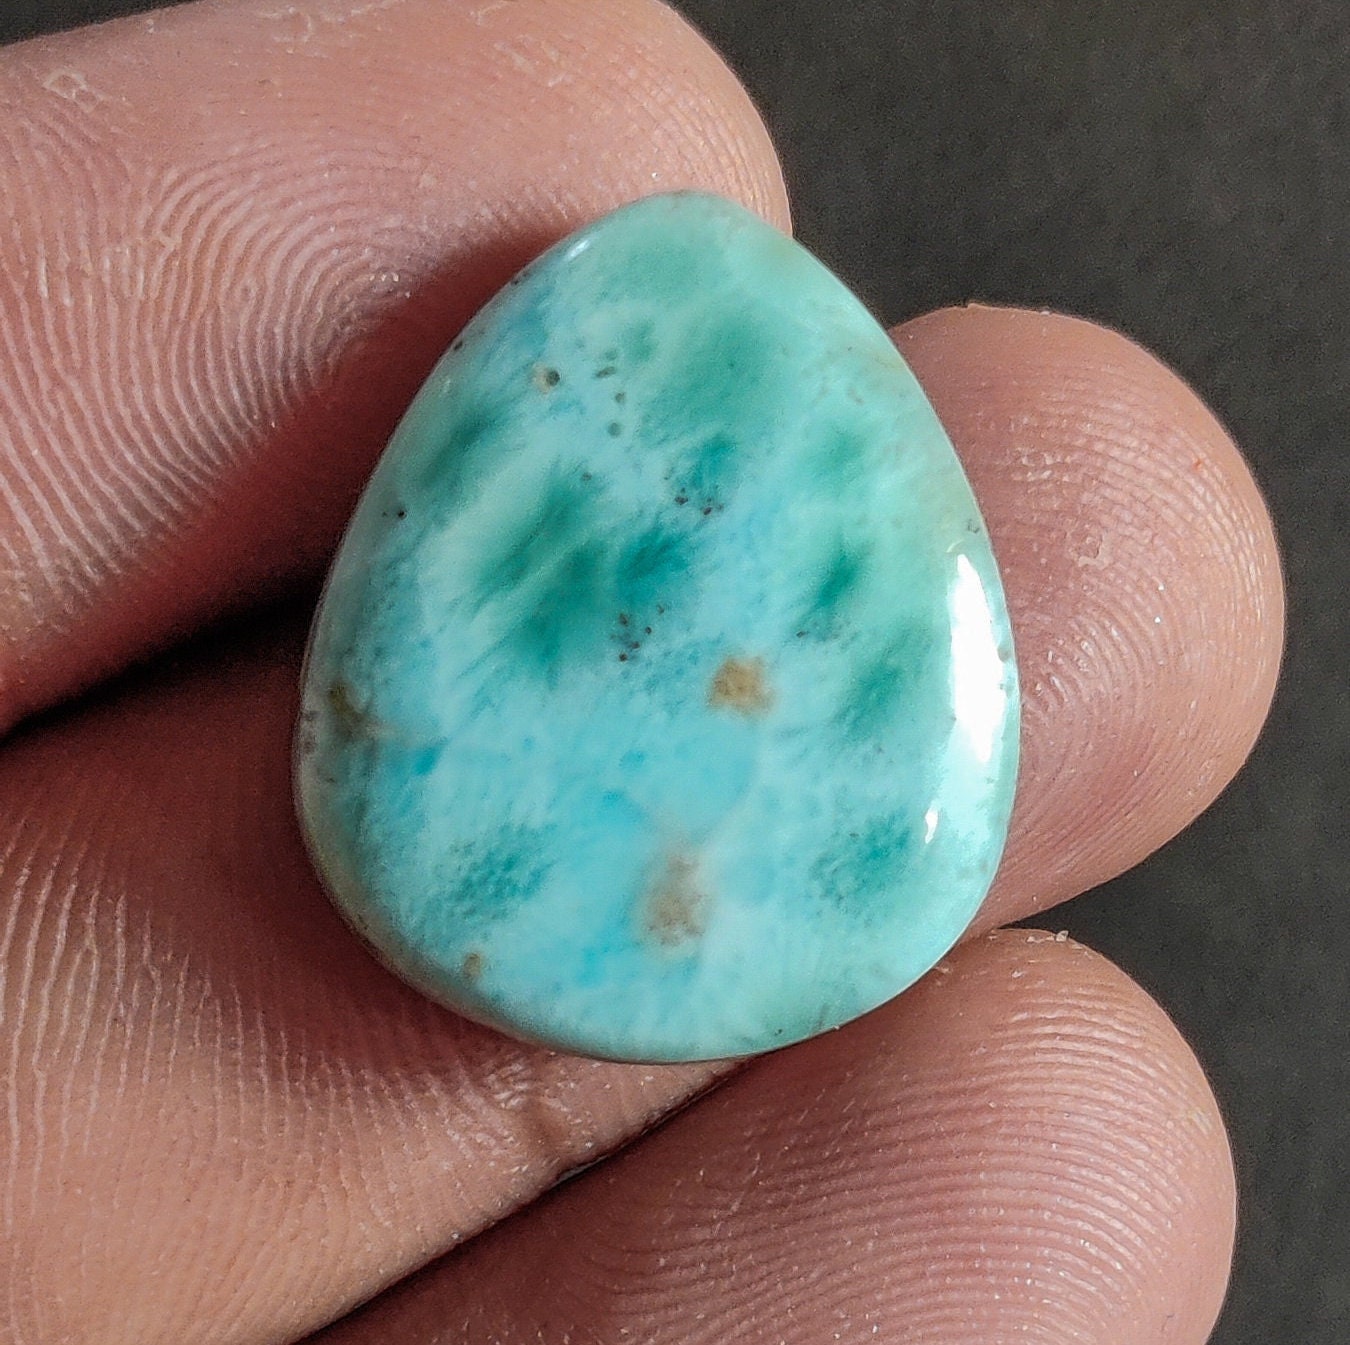 Larimar Top AAA Quality Gemstones Pear Shape Cabochon Natural AAA Top Quality Larimar Gemstones Cabochon 23x15x6mm Approx